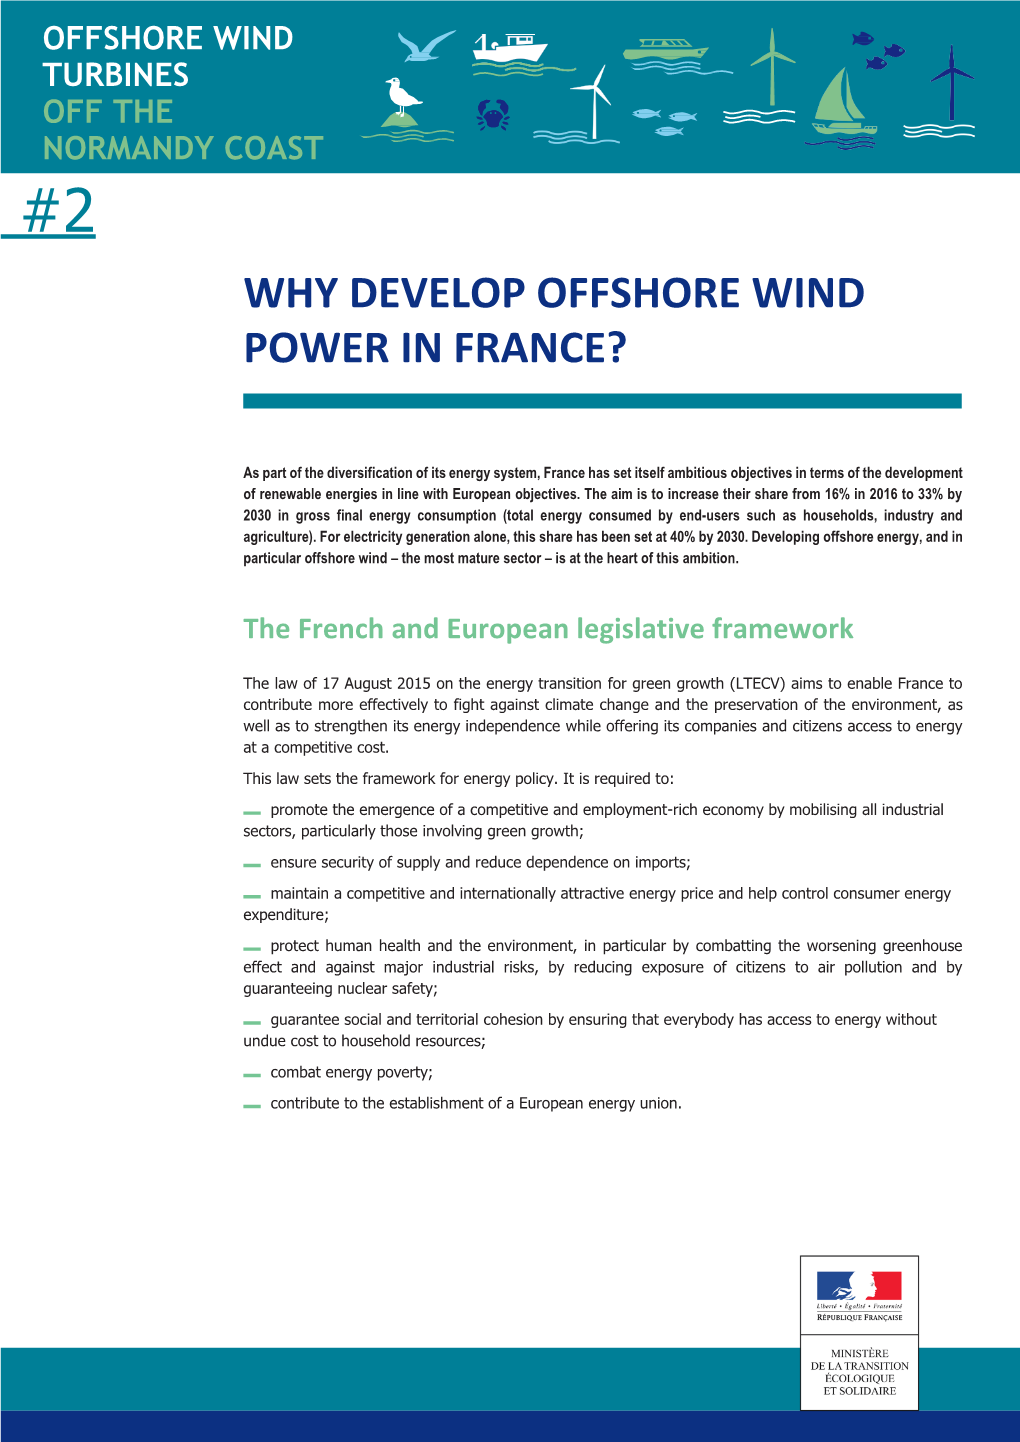 Why Develop Offshore Wind Power in France?